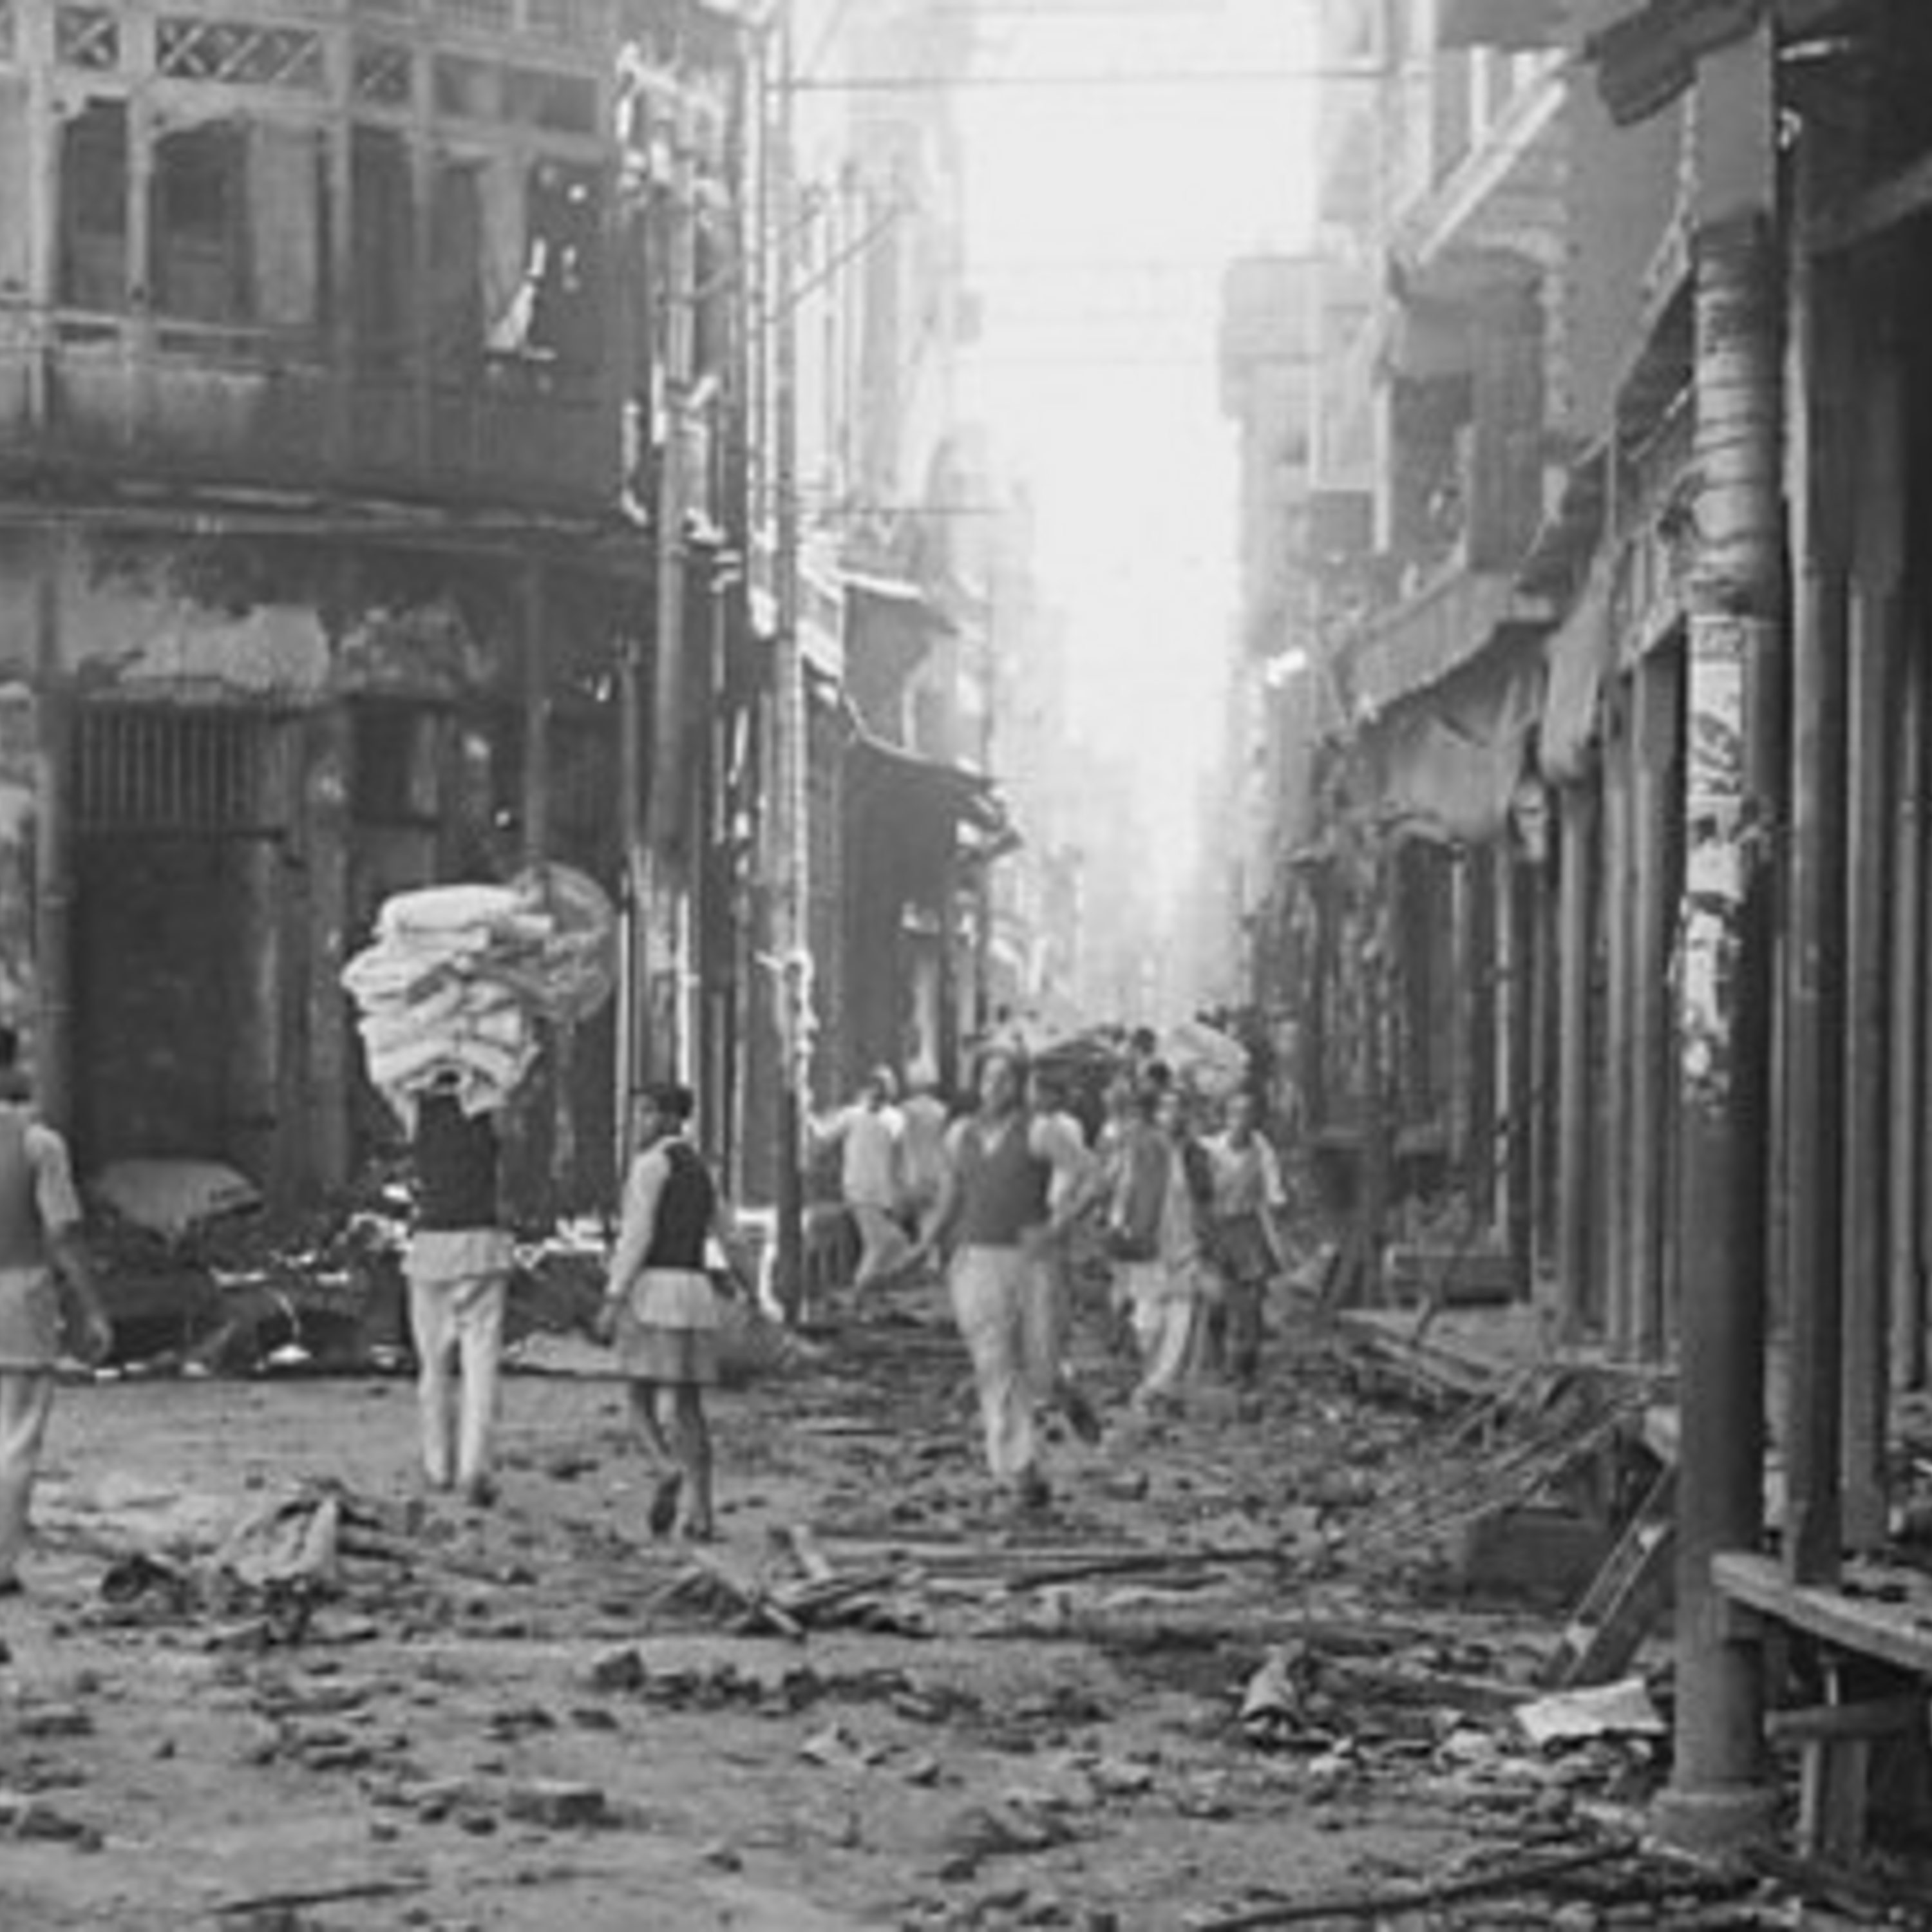 Seventy-five years since India's Partition